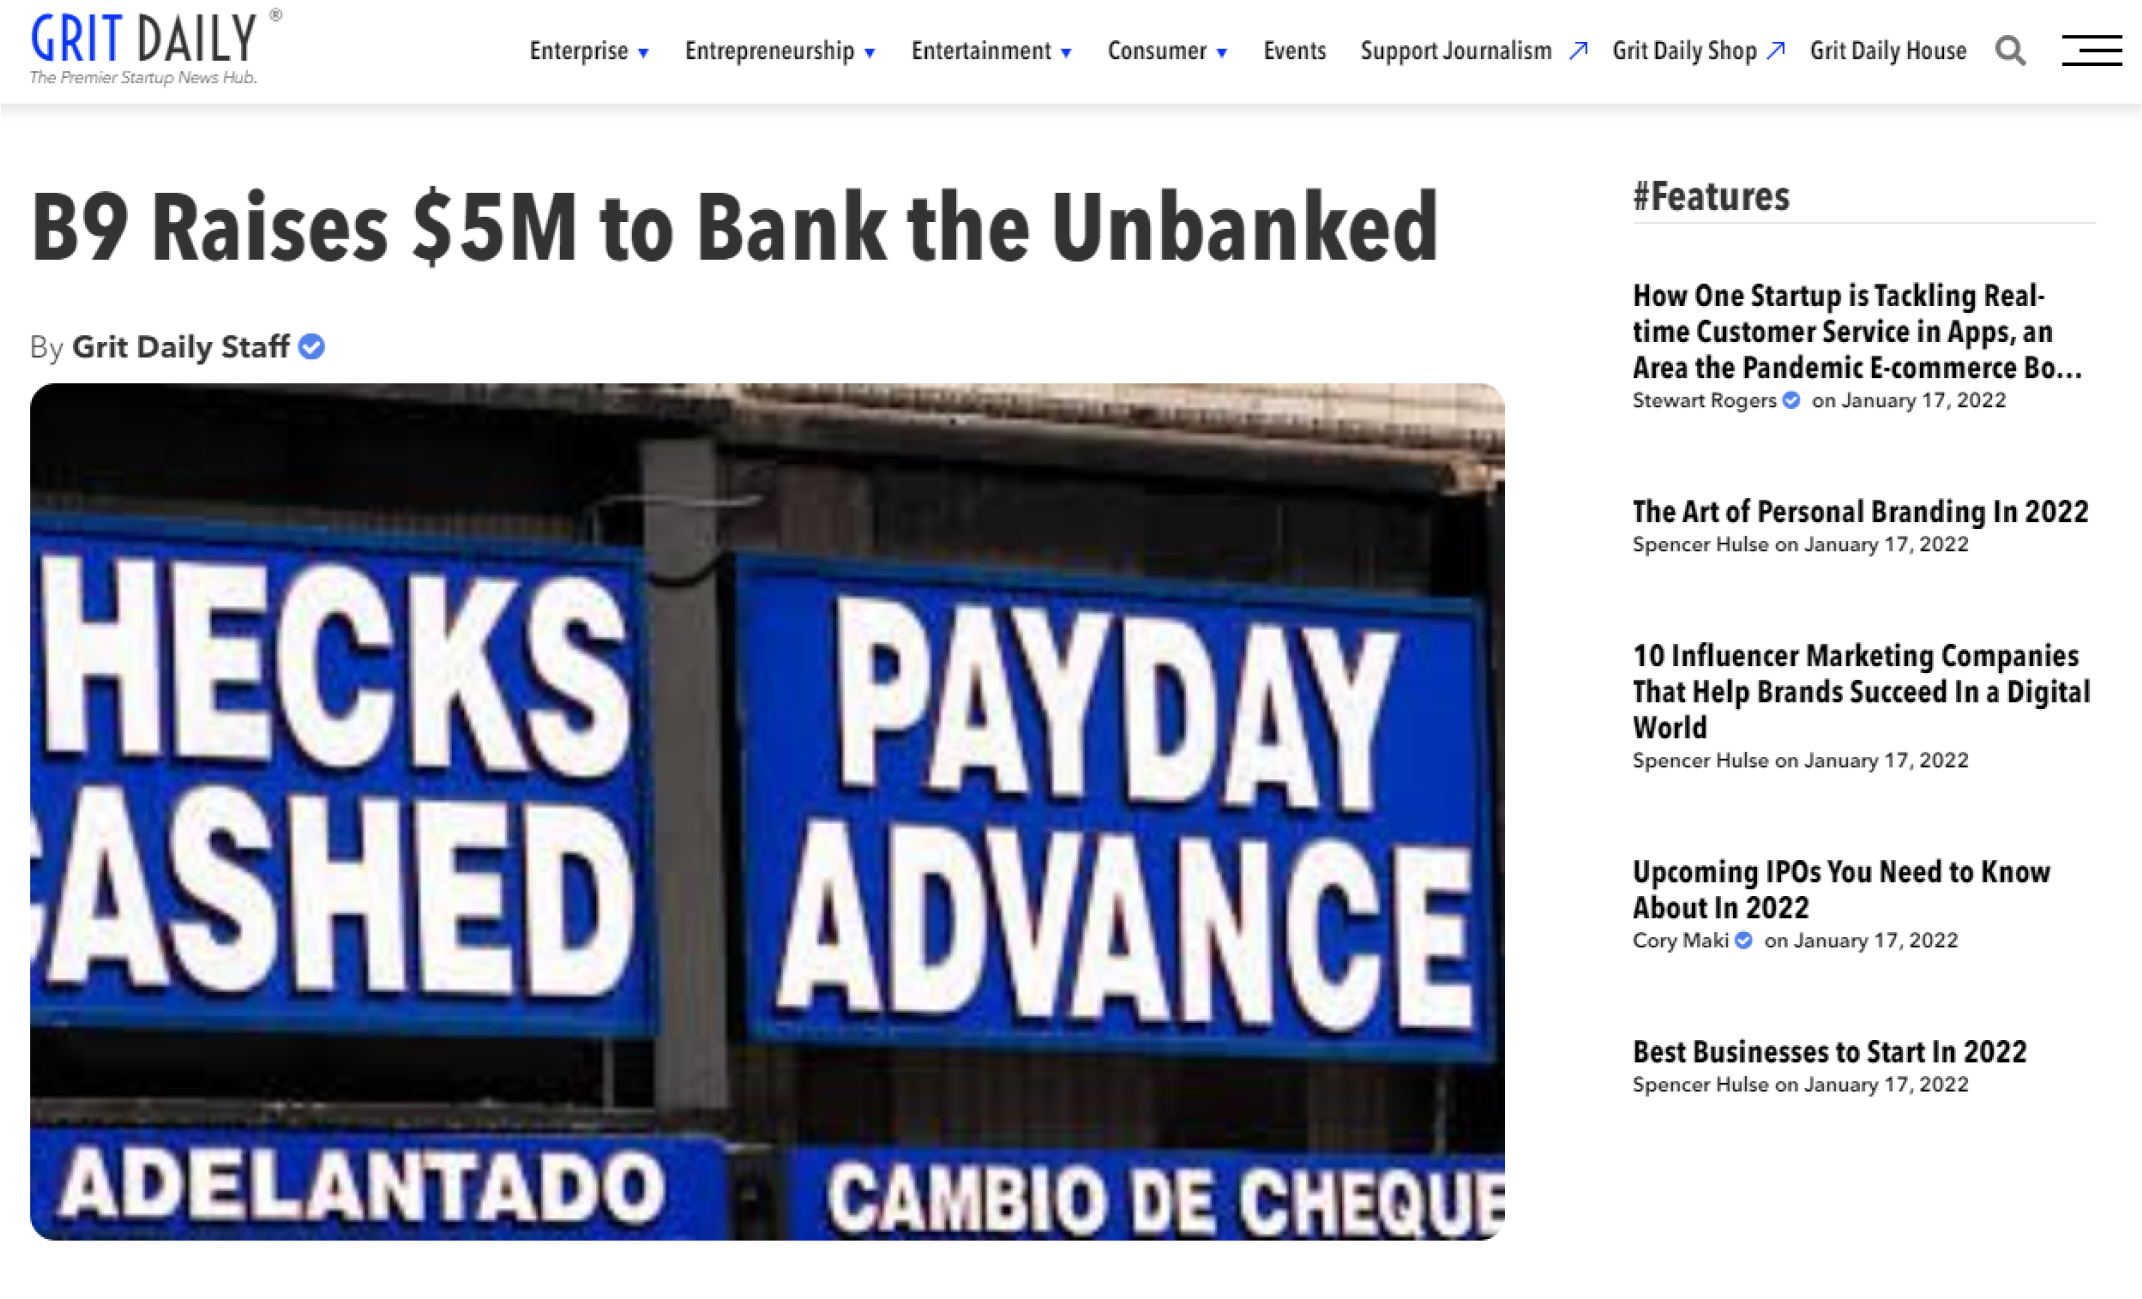 B9 raises $5M to bank the unbanked 